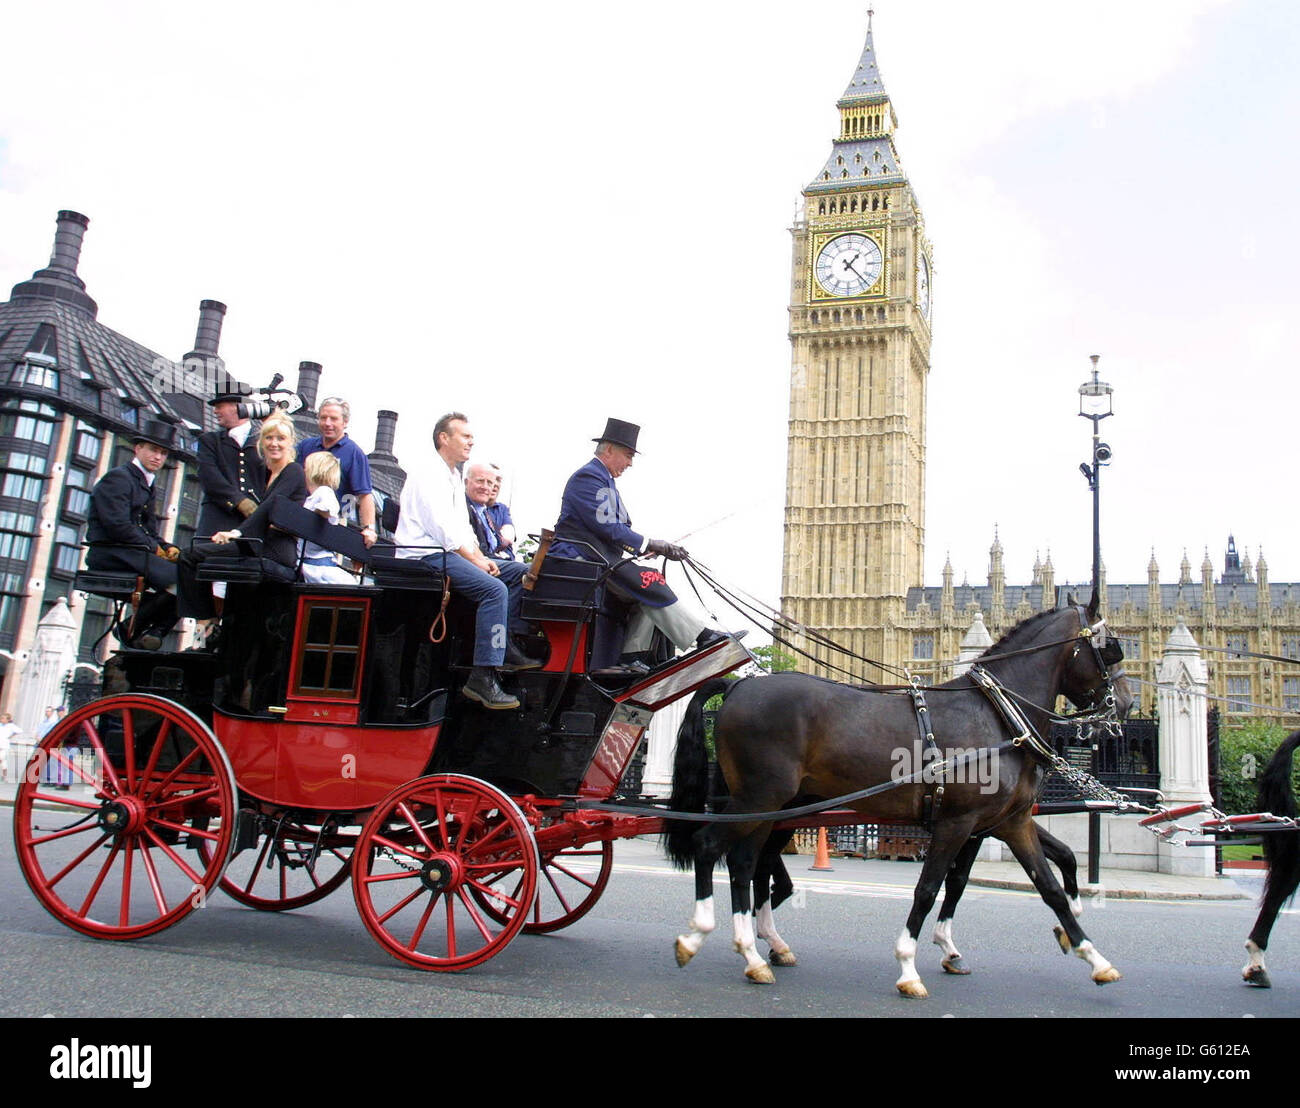 Actor Anthony Head (front white shirt) on a horse and carriage during the last leg of International League for the Protection of Horses (ILPH) Transportation Awareness Ride in Parliament Square in central London. The long distance ride, which started from Kelso in Scotland on July 27, hopes to raise awareness of the apalling conditions in which 133,000 are transported across Europe for slaughter every year. Stock Photo